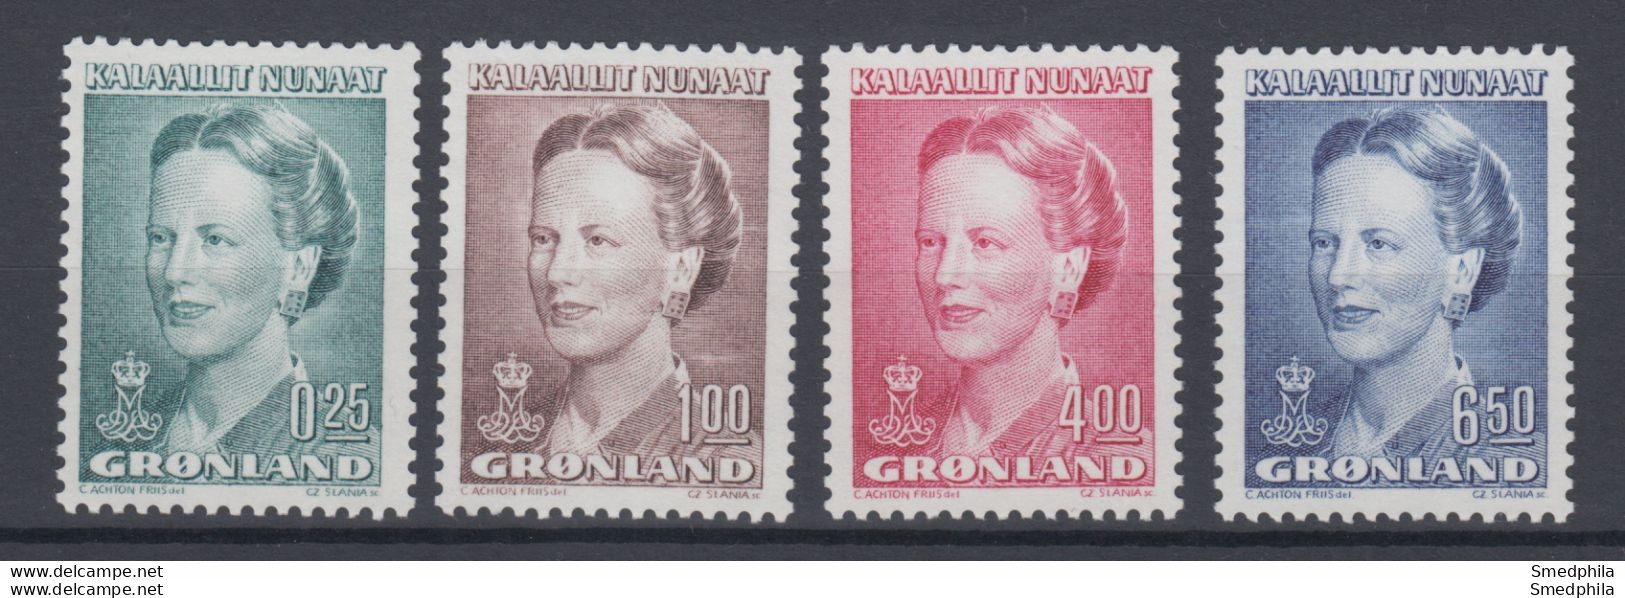 Greenland 1990 - Michel 201-204 MNH ** - Unused Stamps